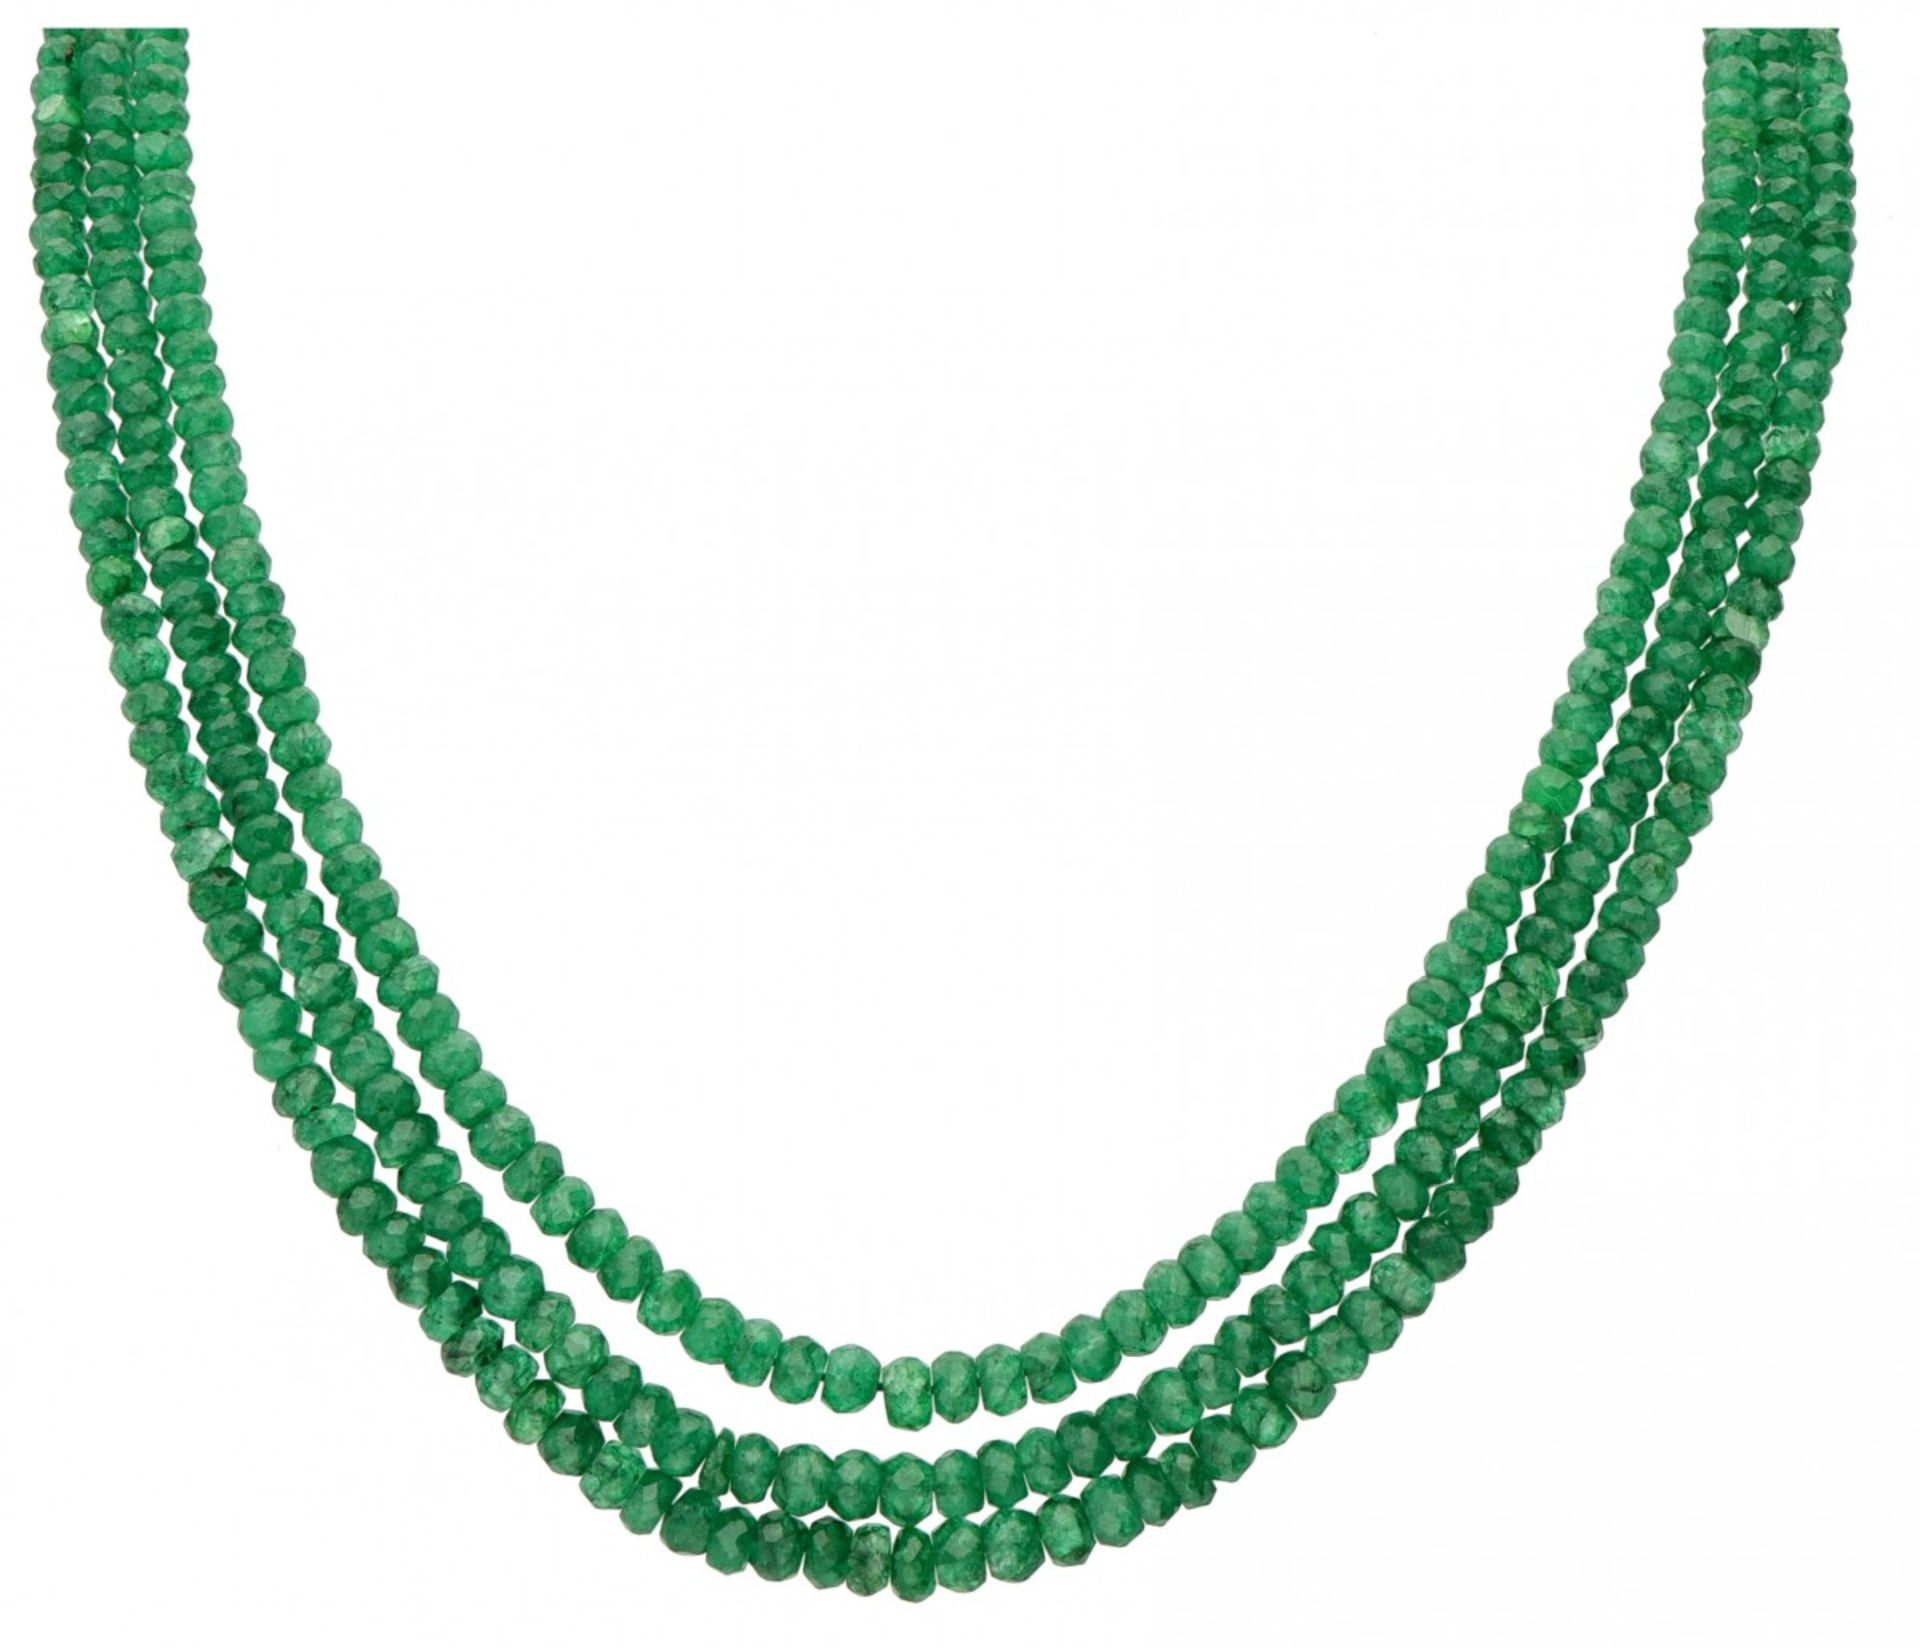 Three-row necklace with a BLA silver closure, completely set with green quartz. - Image 2 of 2